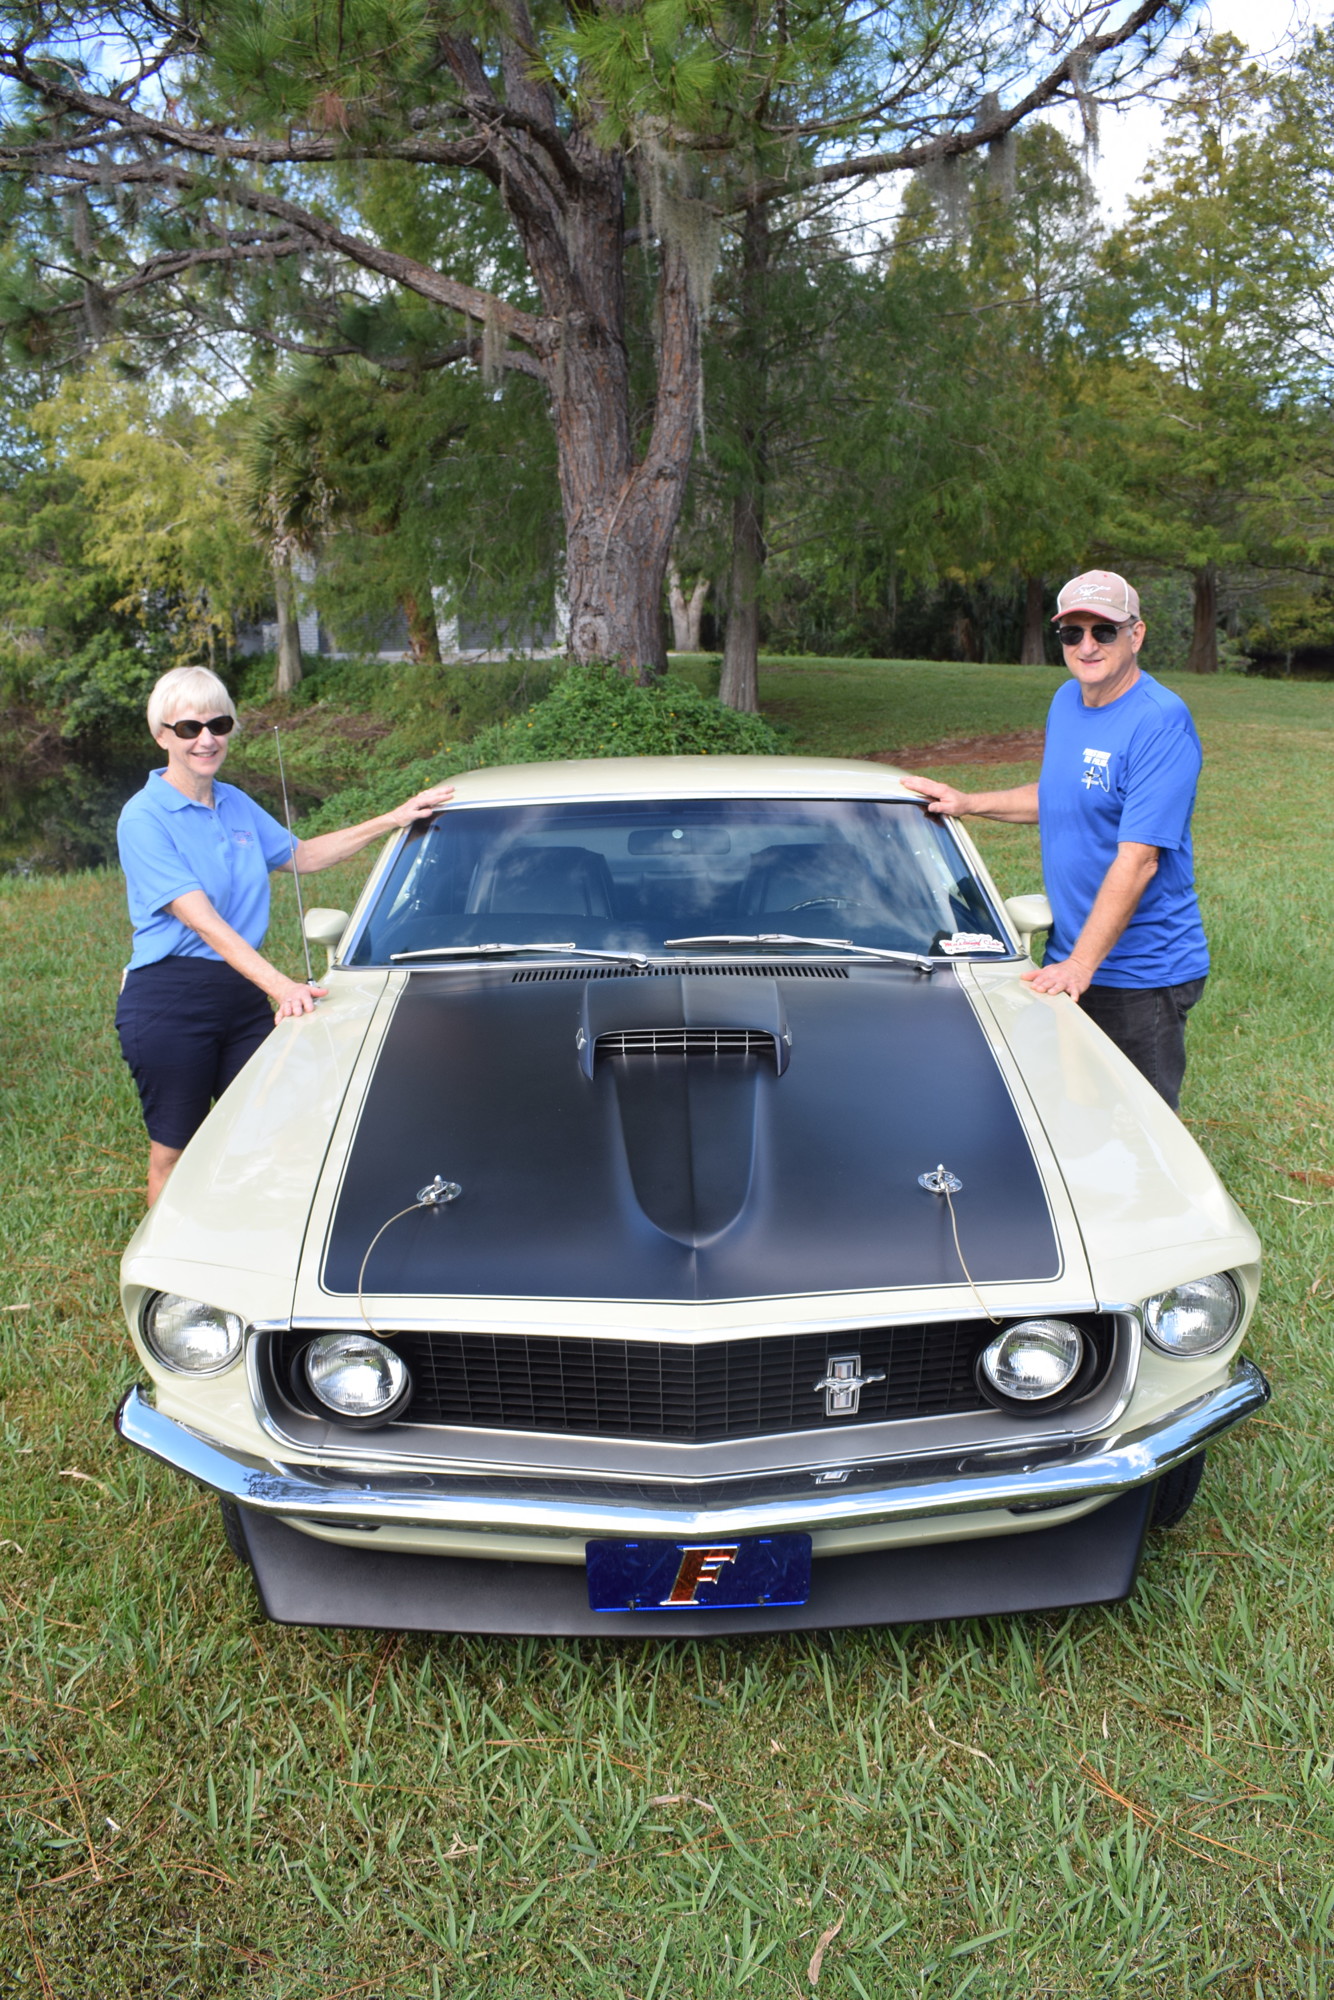 Phala and Dayton Amey say they liked their Mach 1 was an unusual color, which now draws a lot of attention. (Photo by Jay Heater)